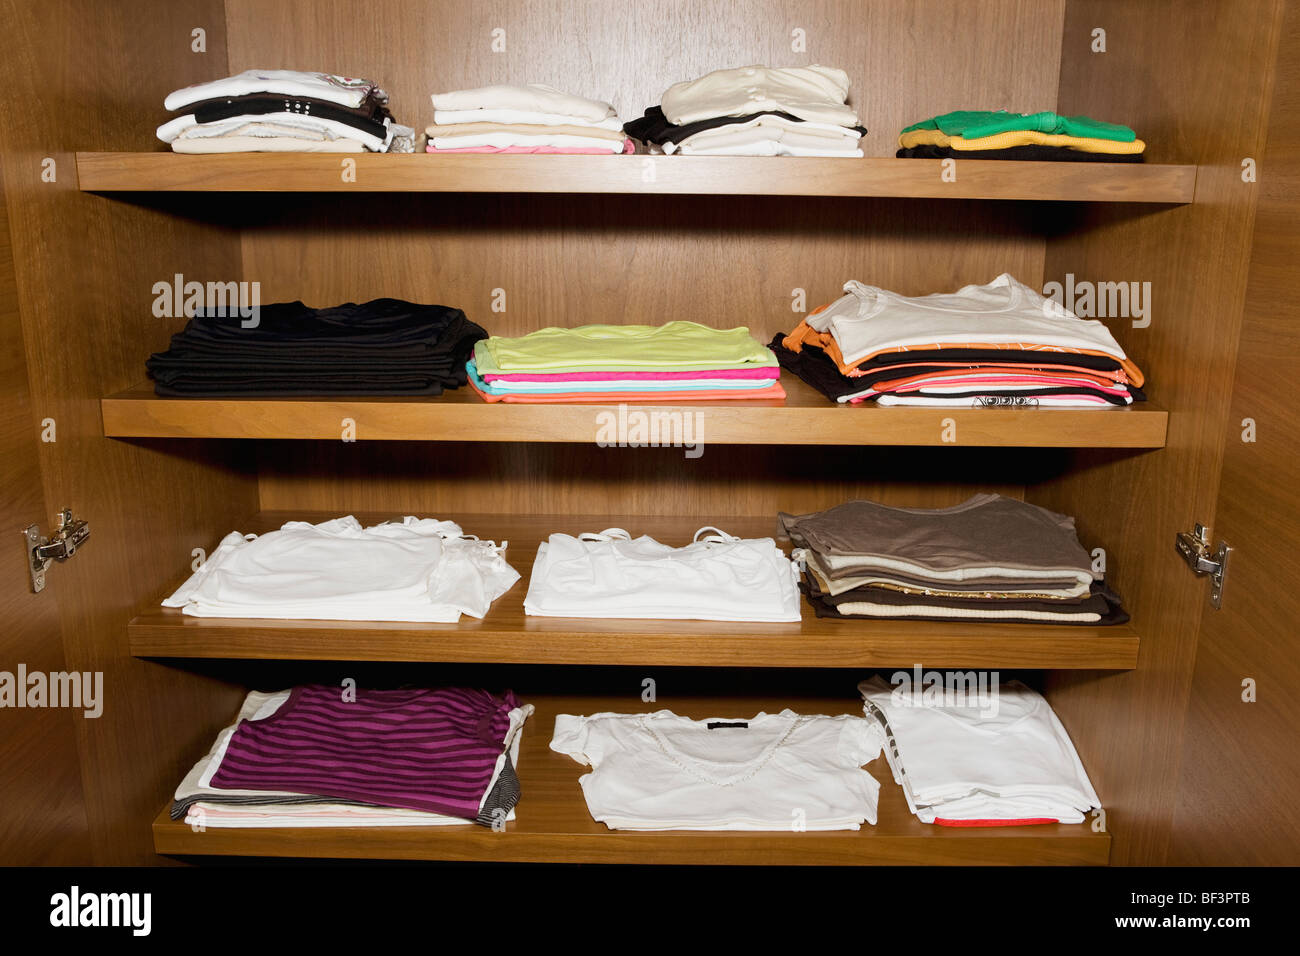 Clothes on shelves Stock Photo